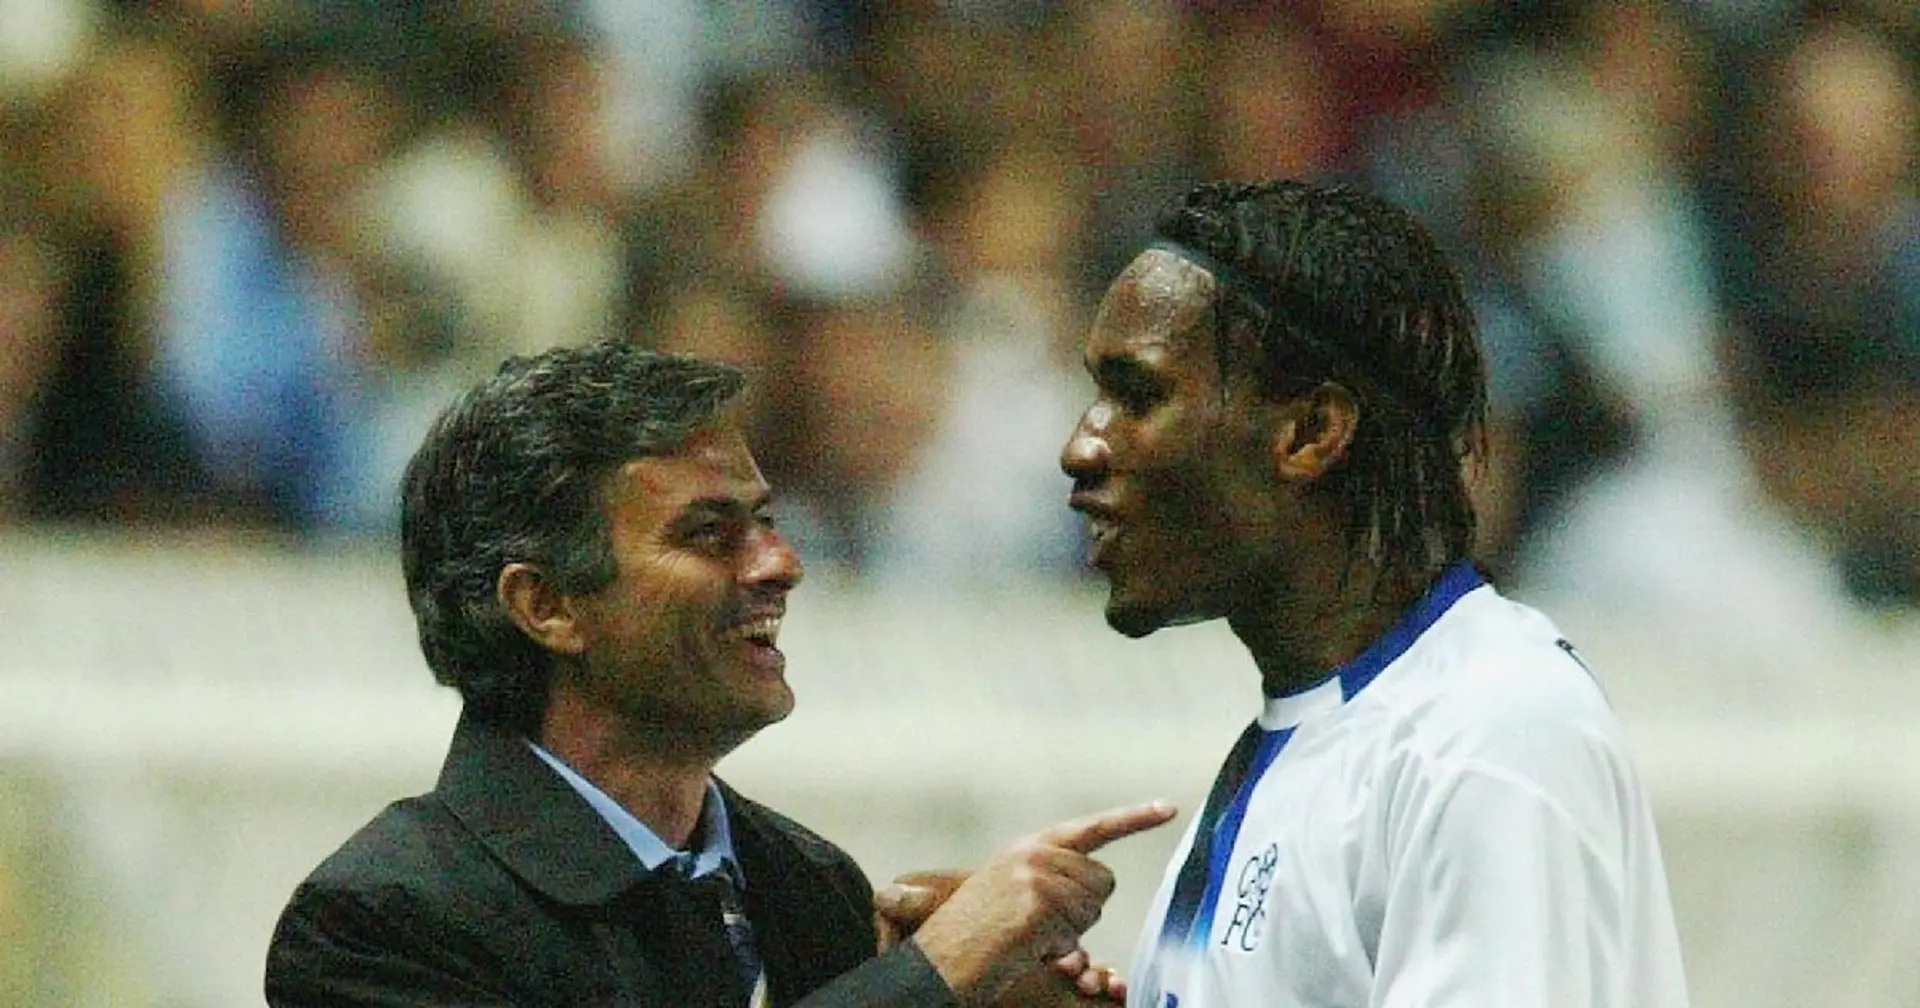 How Jose Mourinho persuaded Roman Abramovich to buy Didier Drogba – in less than 10 words